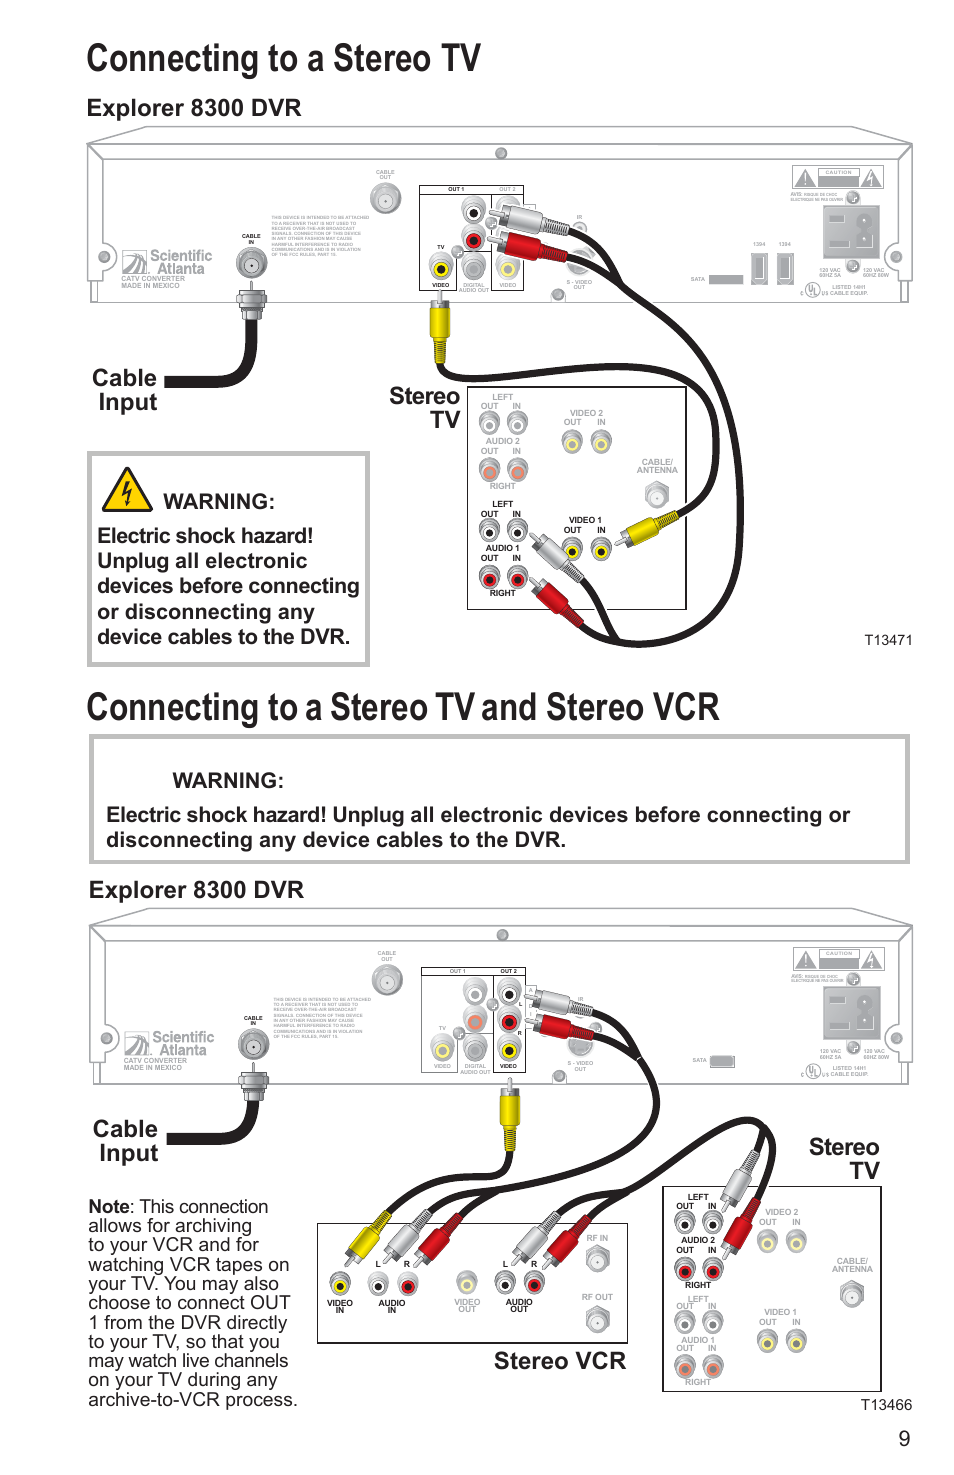 Connecting to a stereo tv, Connecting to a stereo tv and stereo vcr, Explorer 8300 dvr | Cable input stereo vcr, Stereo tv, Cable input | Cisco Explorer 8300 User Manual | Page 15 / 20